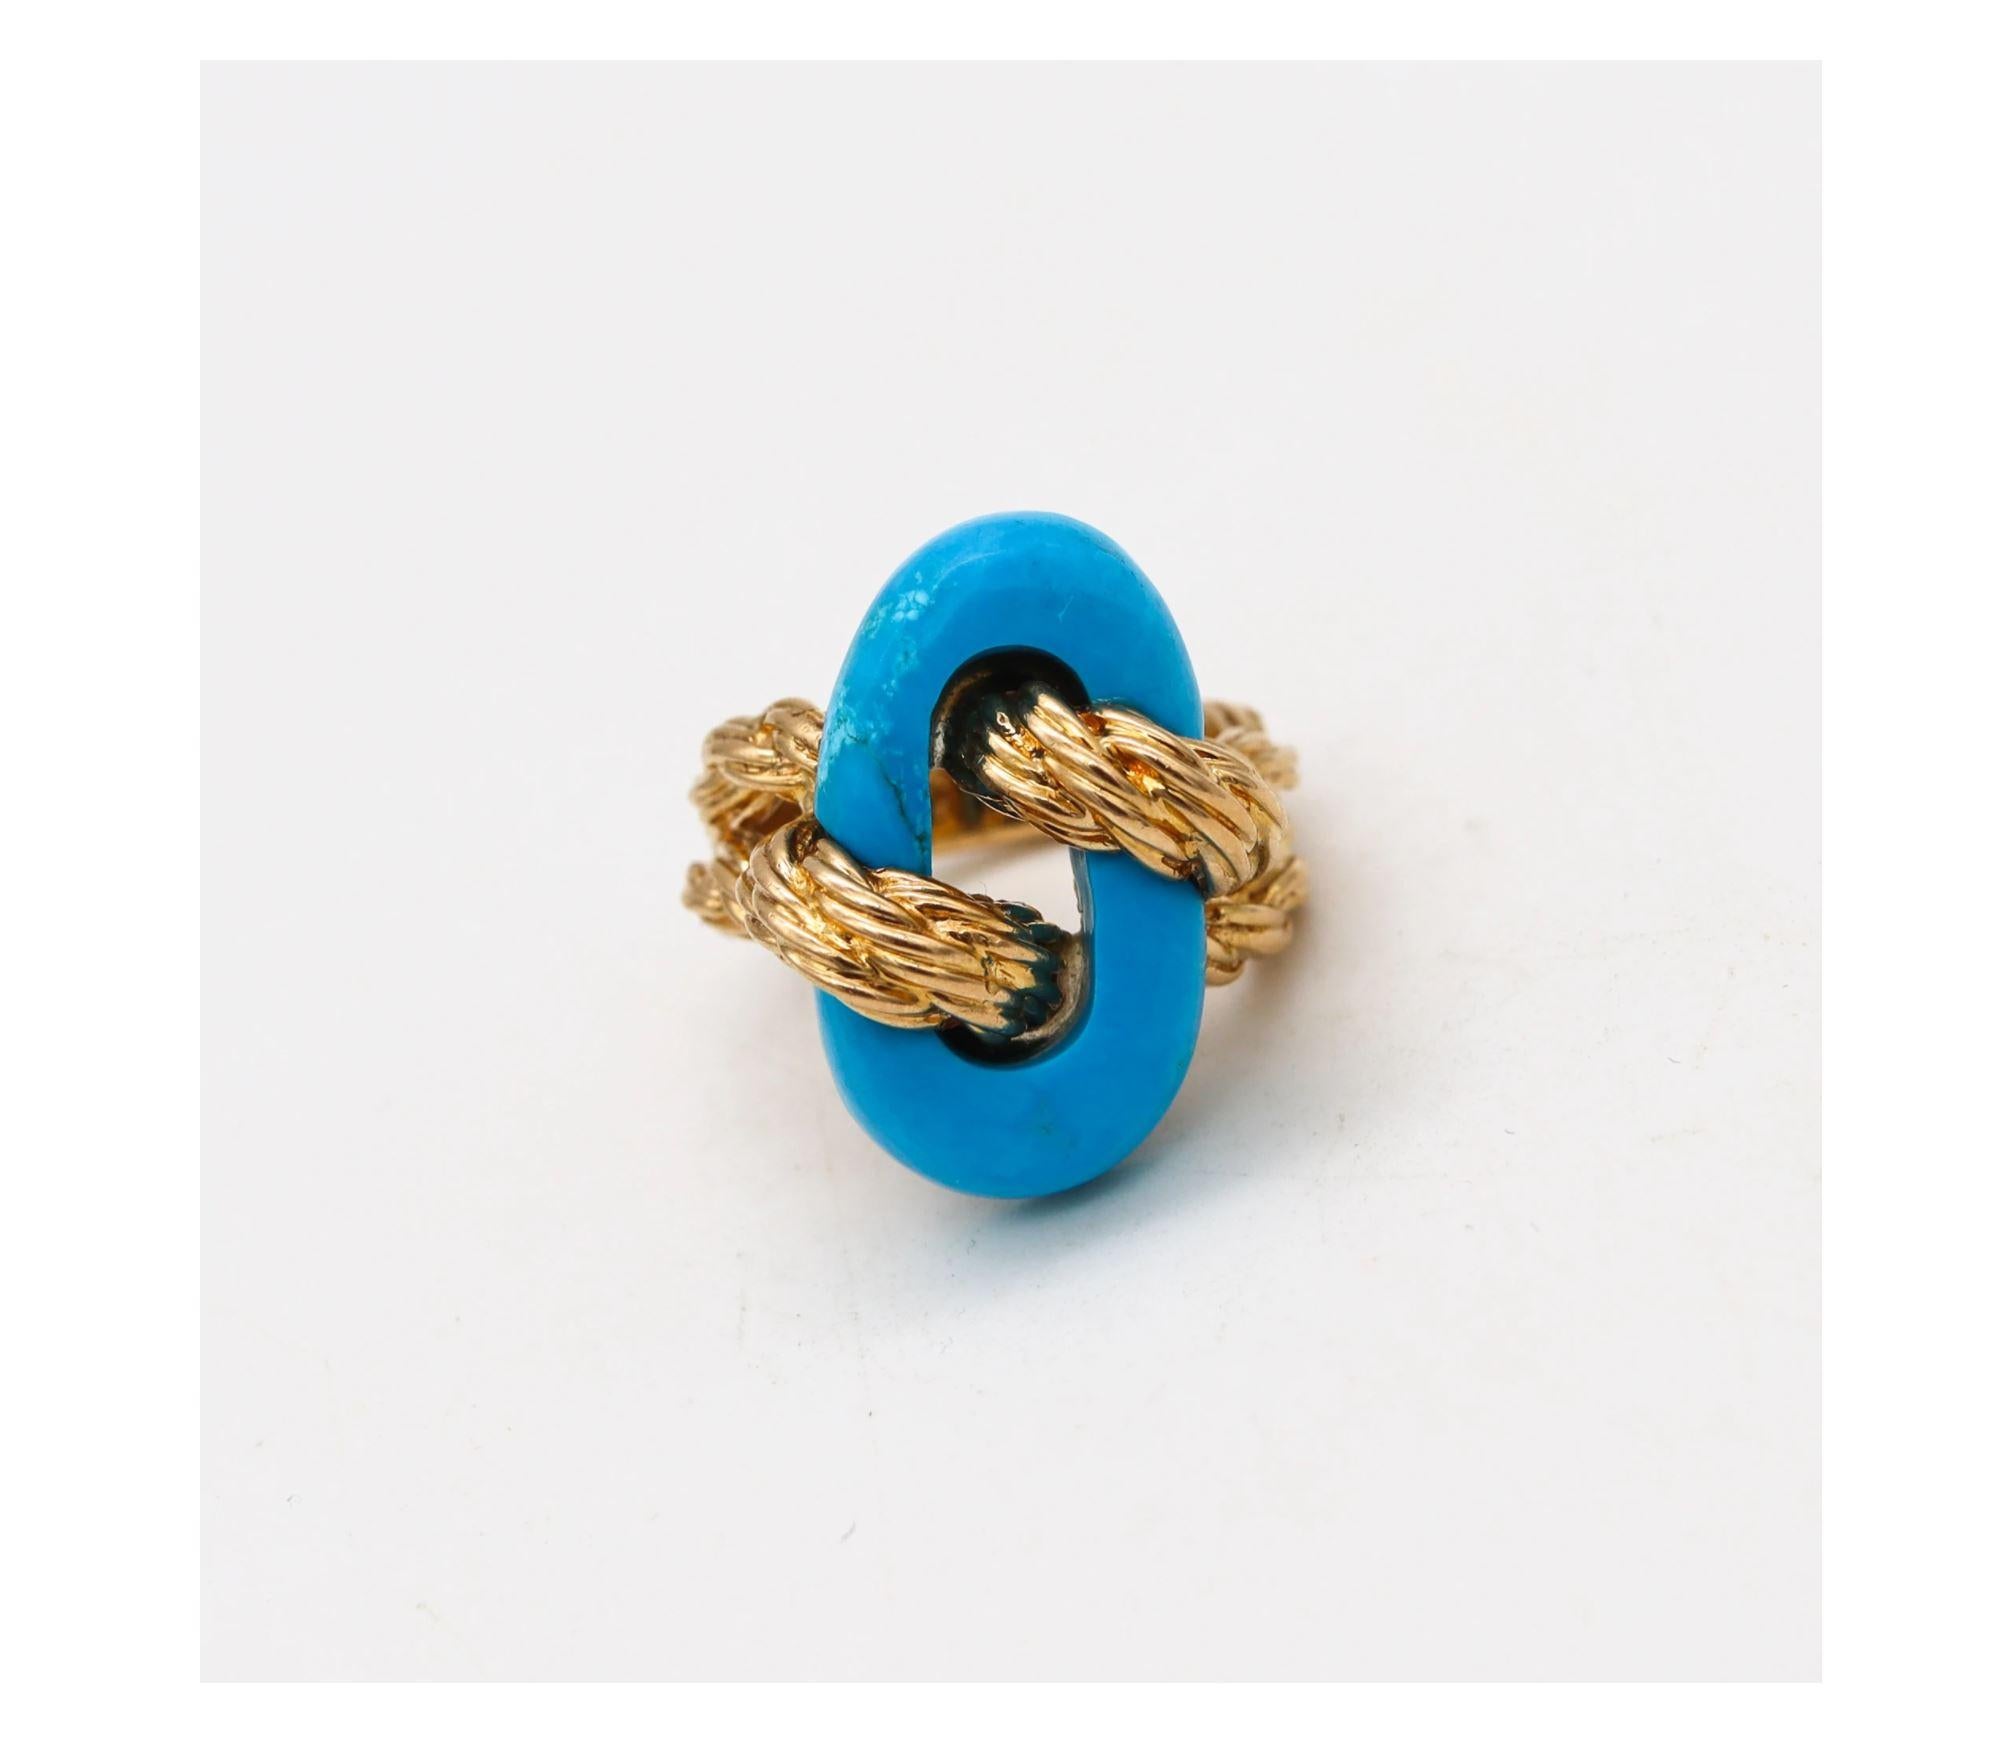 A cocktail ring designed by Van Cleef & Arpels.

Beautiful and colorful vintage piece made in Paris France by the iconic jewelry house of Van Cleef & Arpels, back in the 1970. This nice and rare ring has been crafted with twisted ropes patterns in